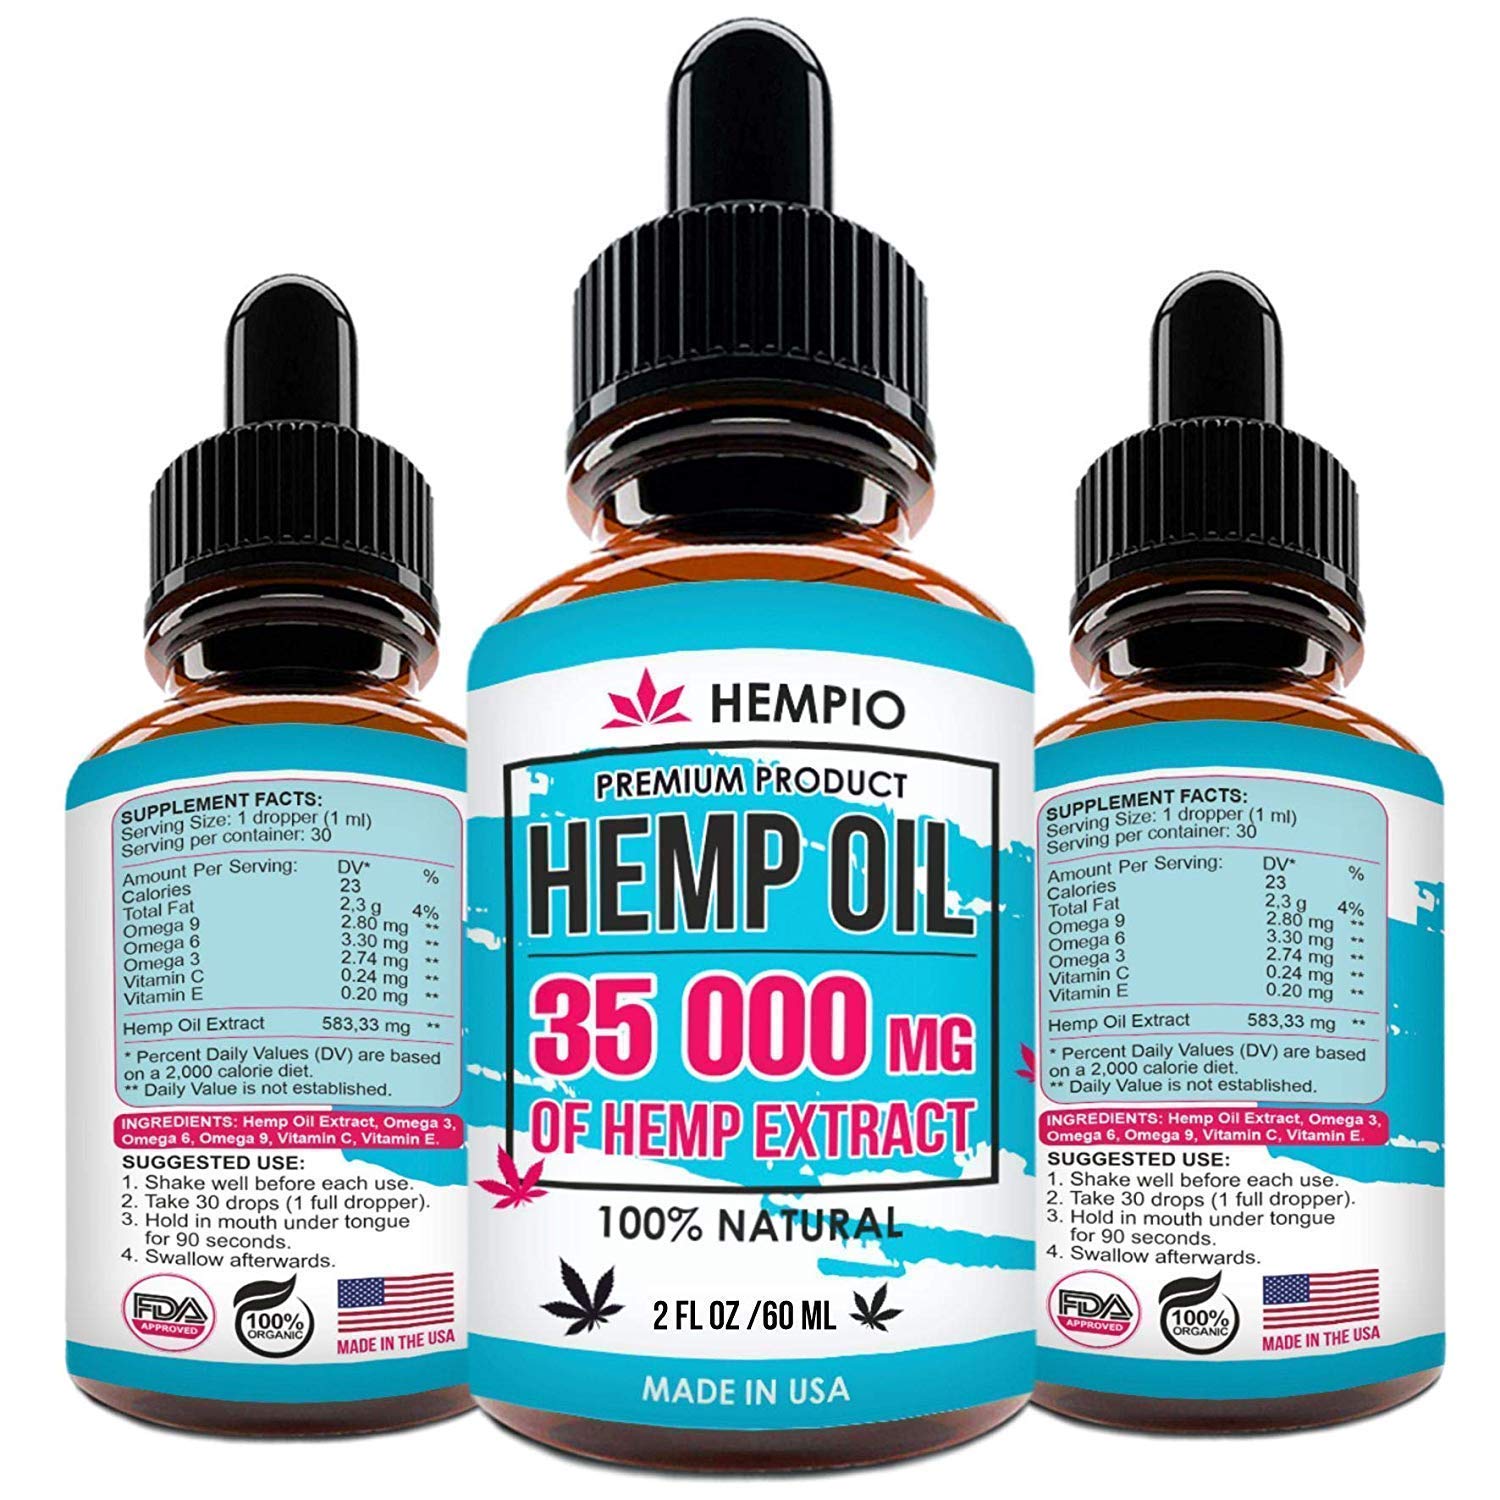 Pure Hemp Extract 35 000 MG for Pain Relief, Relaxation, Sleep and Mood Support, Natural, Organic, Vegan, Zero CBD